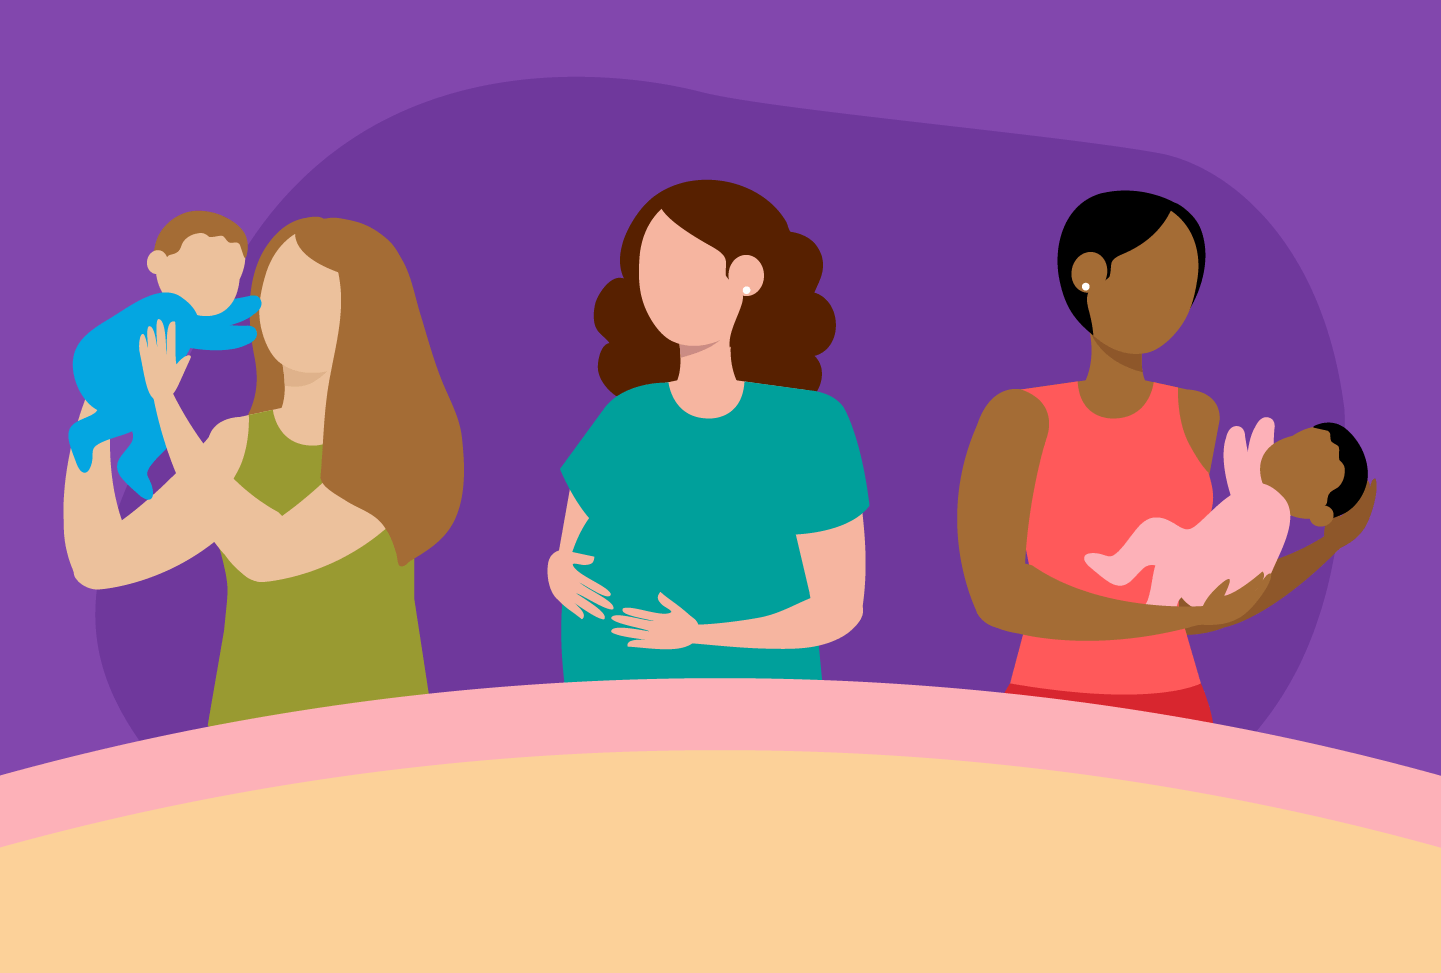 Illustration of two mothers holding babies, pregnant woman in middle